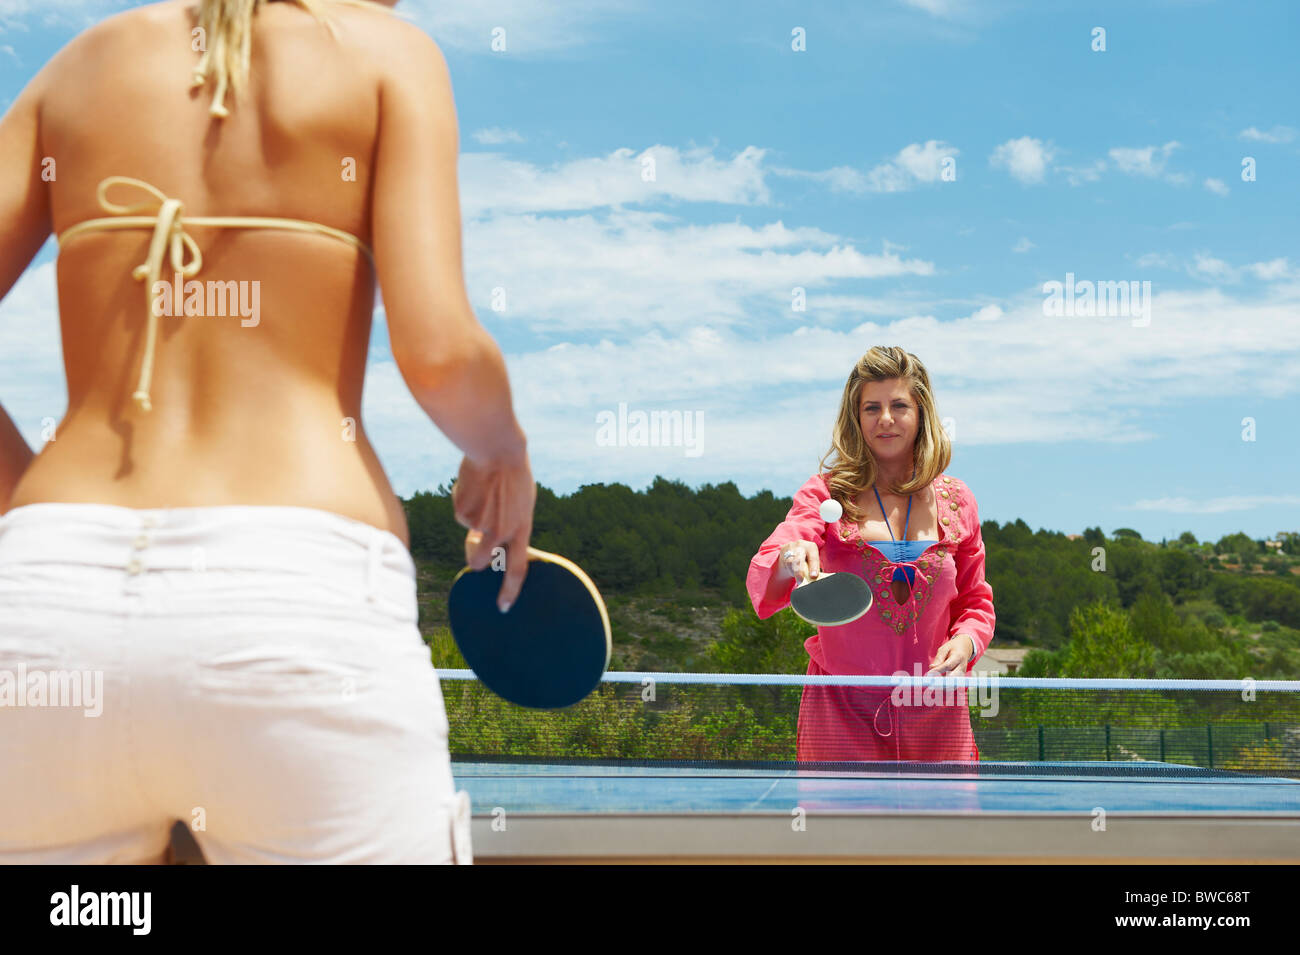 Two women playing table tennis outdoors Stock Photo